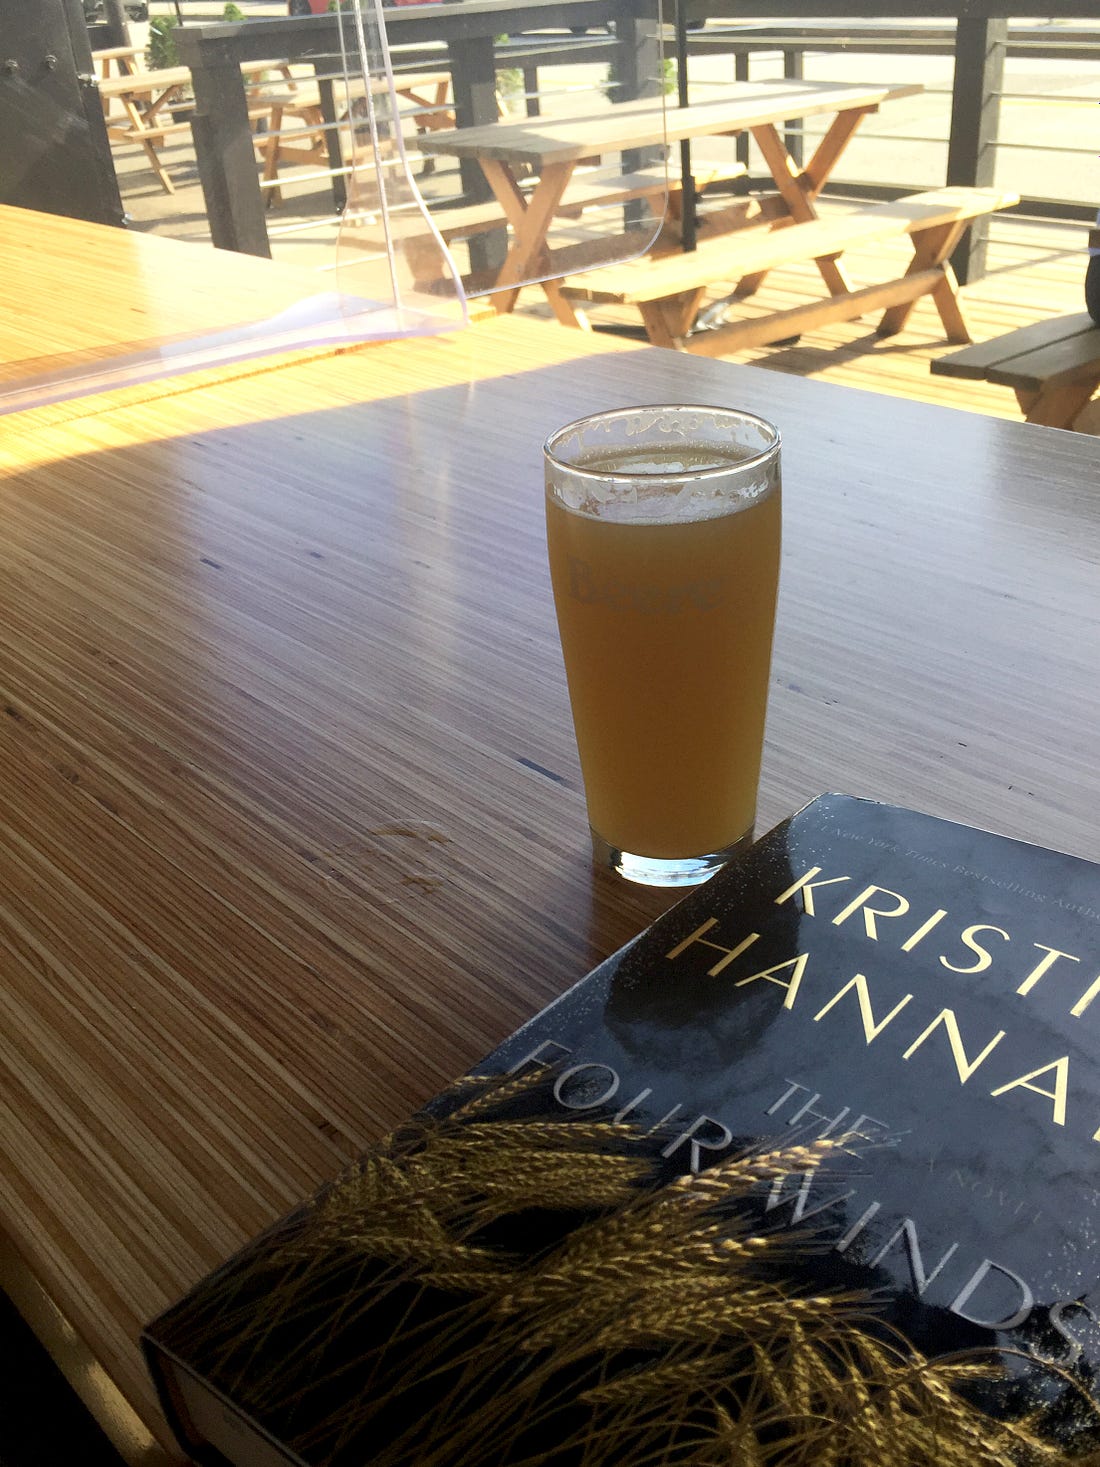 a wooden table with a view of a patio with picnic tables, and the street beyond. On the table is a glass of hazy IPA and a black hardcover book, Kristin Hannah's "The Four Winds".